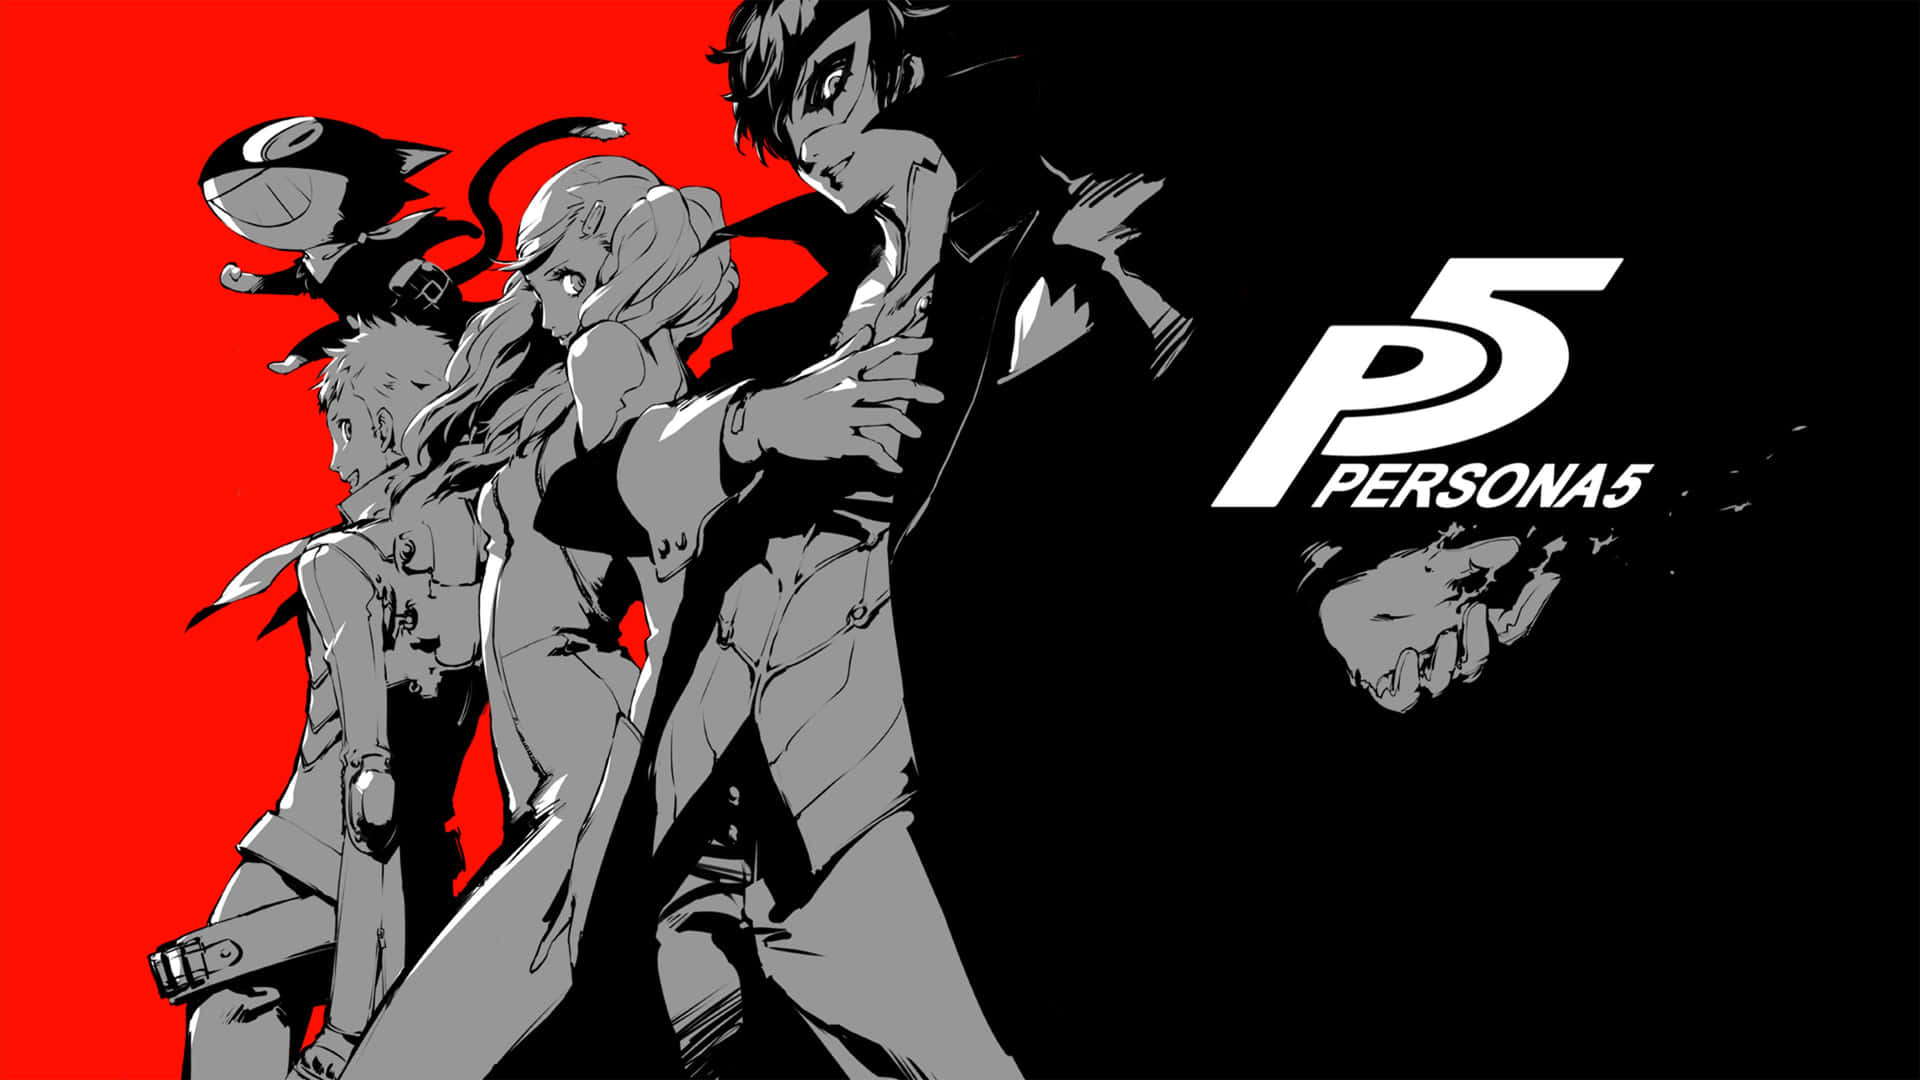 Caption: A group of Persona characters in a futuristic city setting.